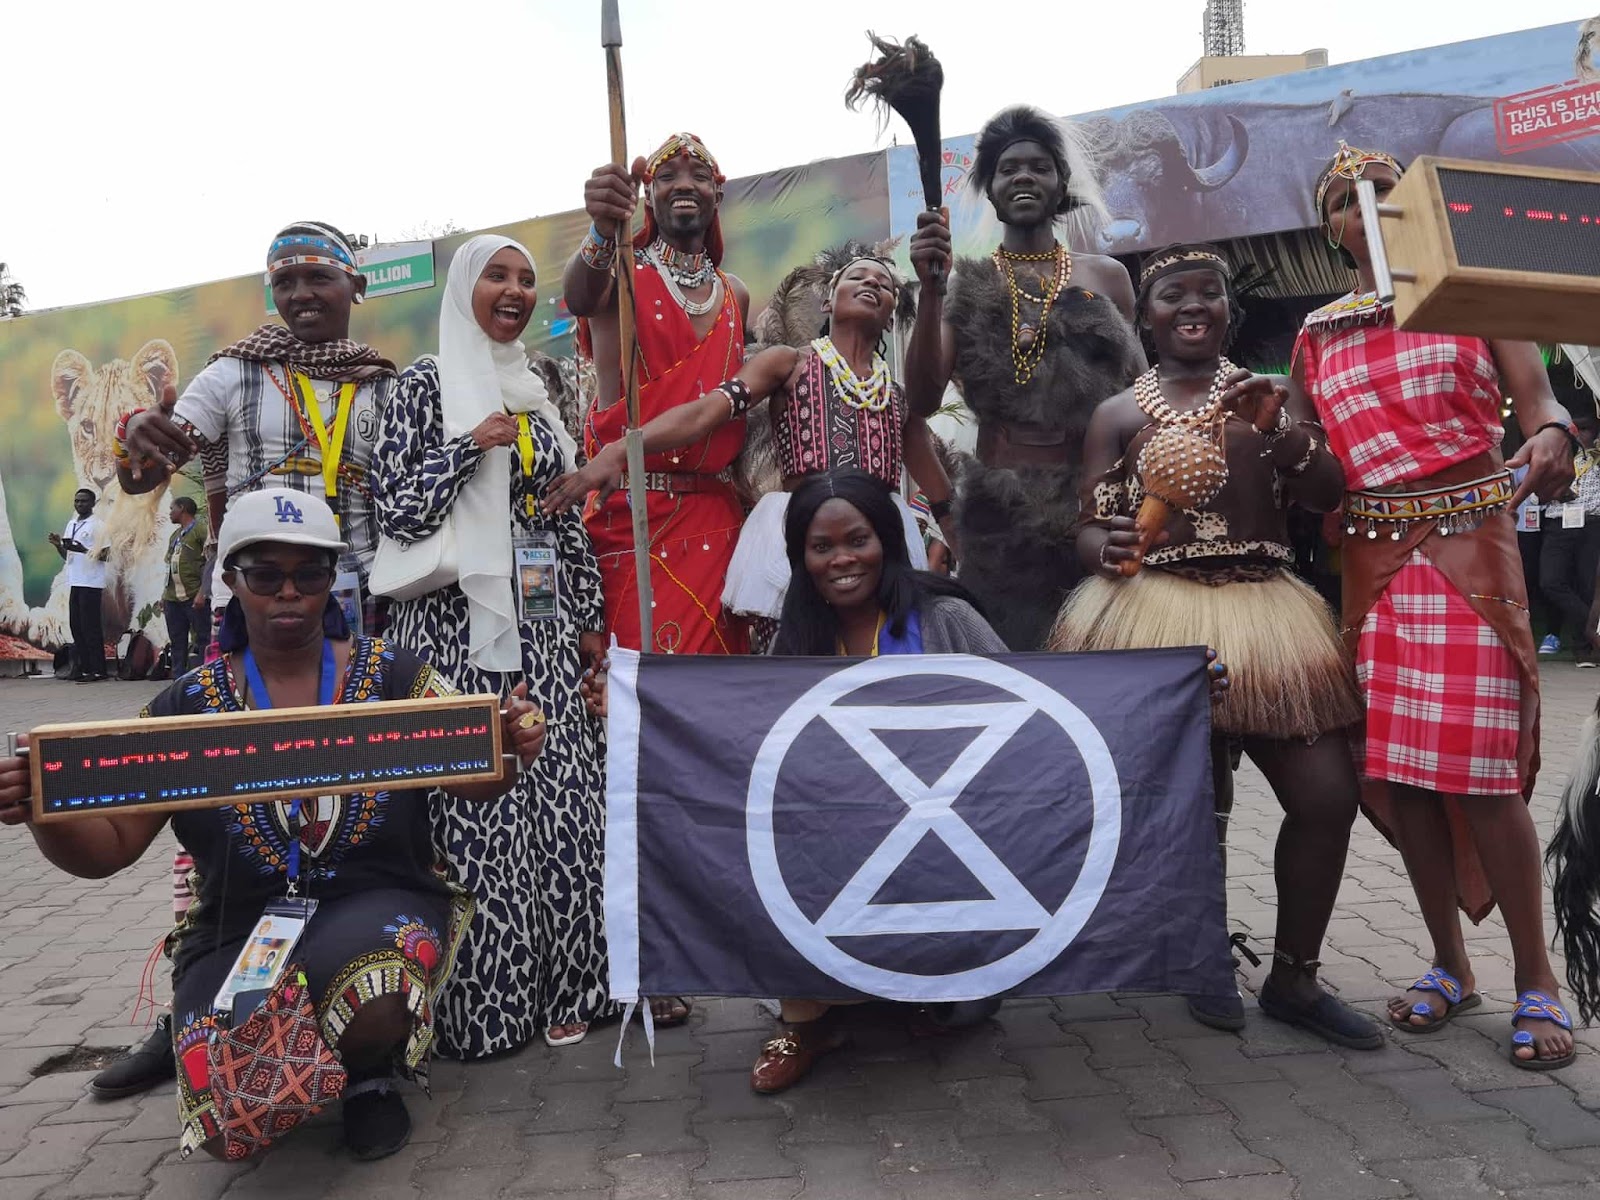 XR Kenya pose for a group photo outside the summit, some rebels in tribal dress.